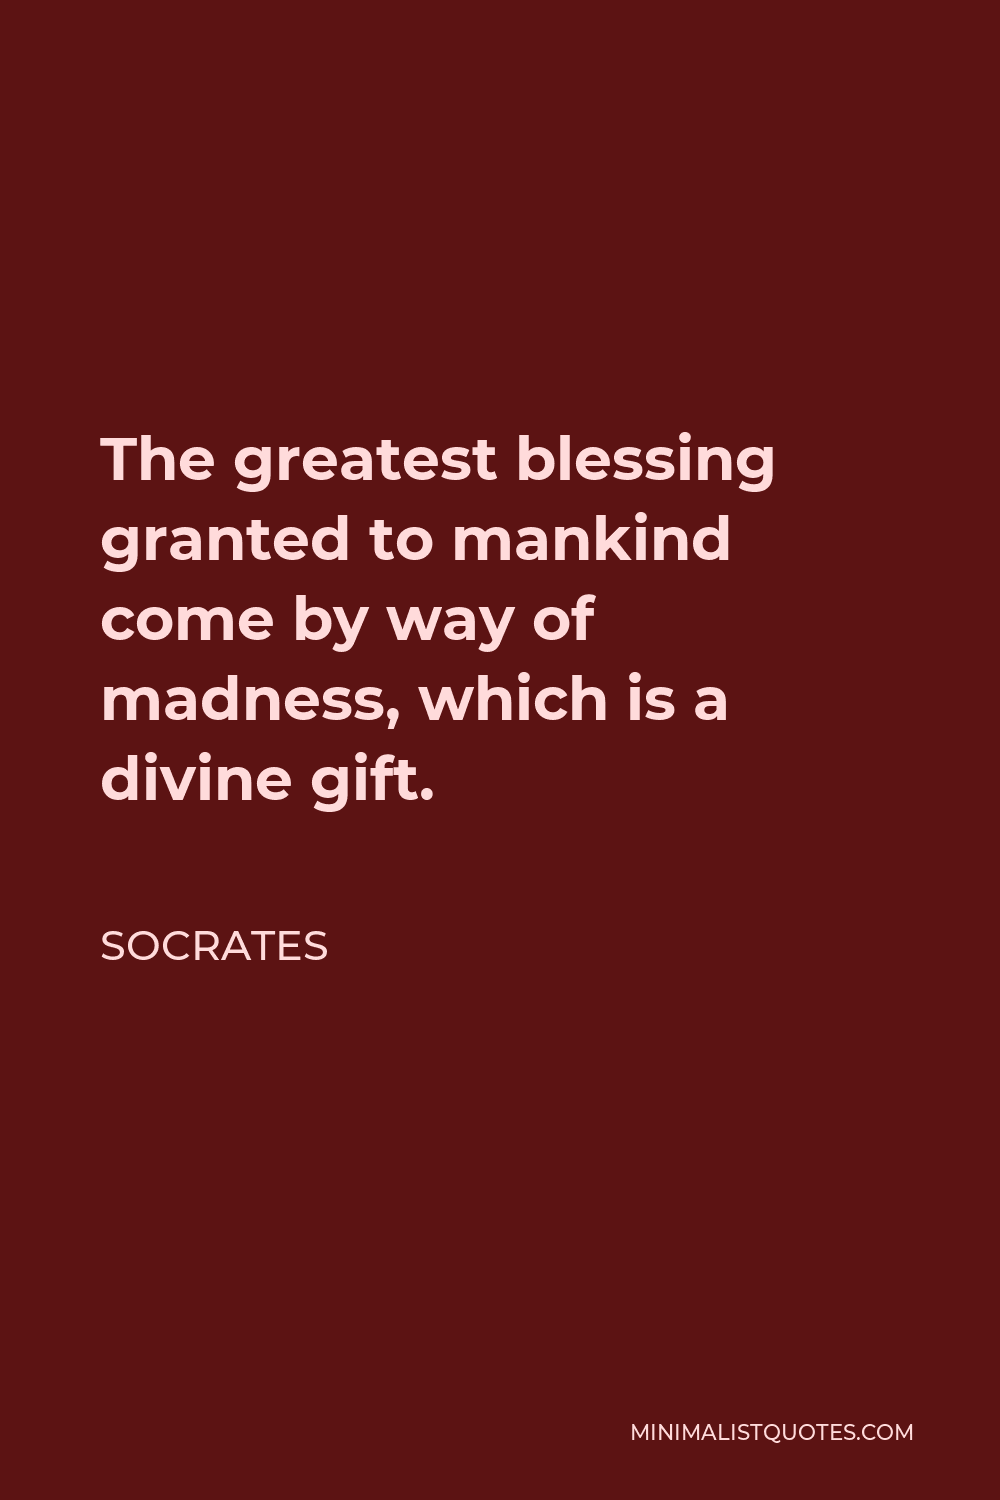 Socrates Quote - The greatest blessing granted to mankind come by way of madness, which is a divine gift.